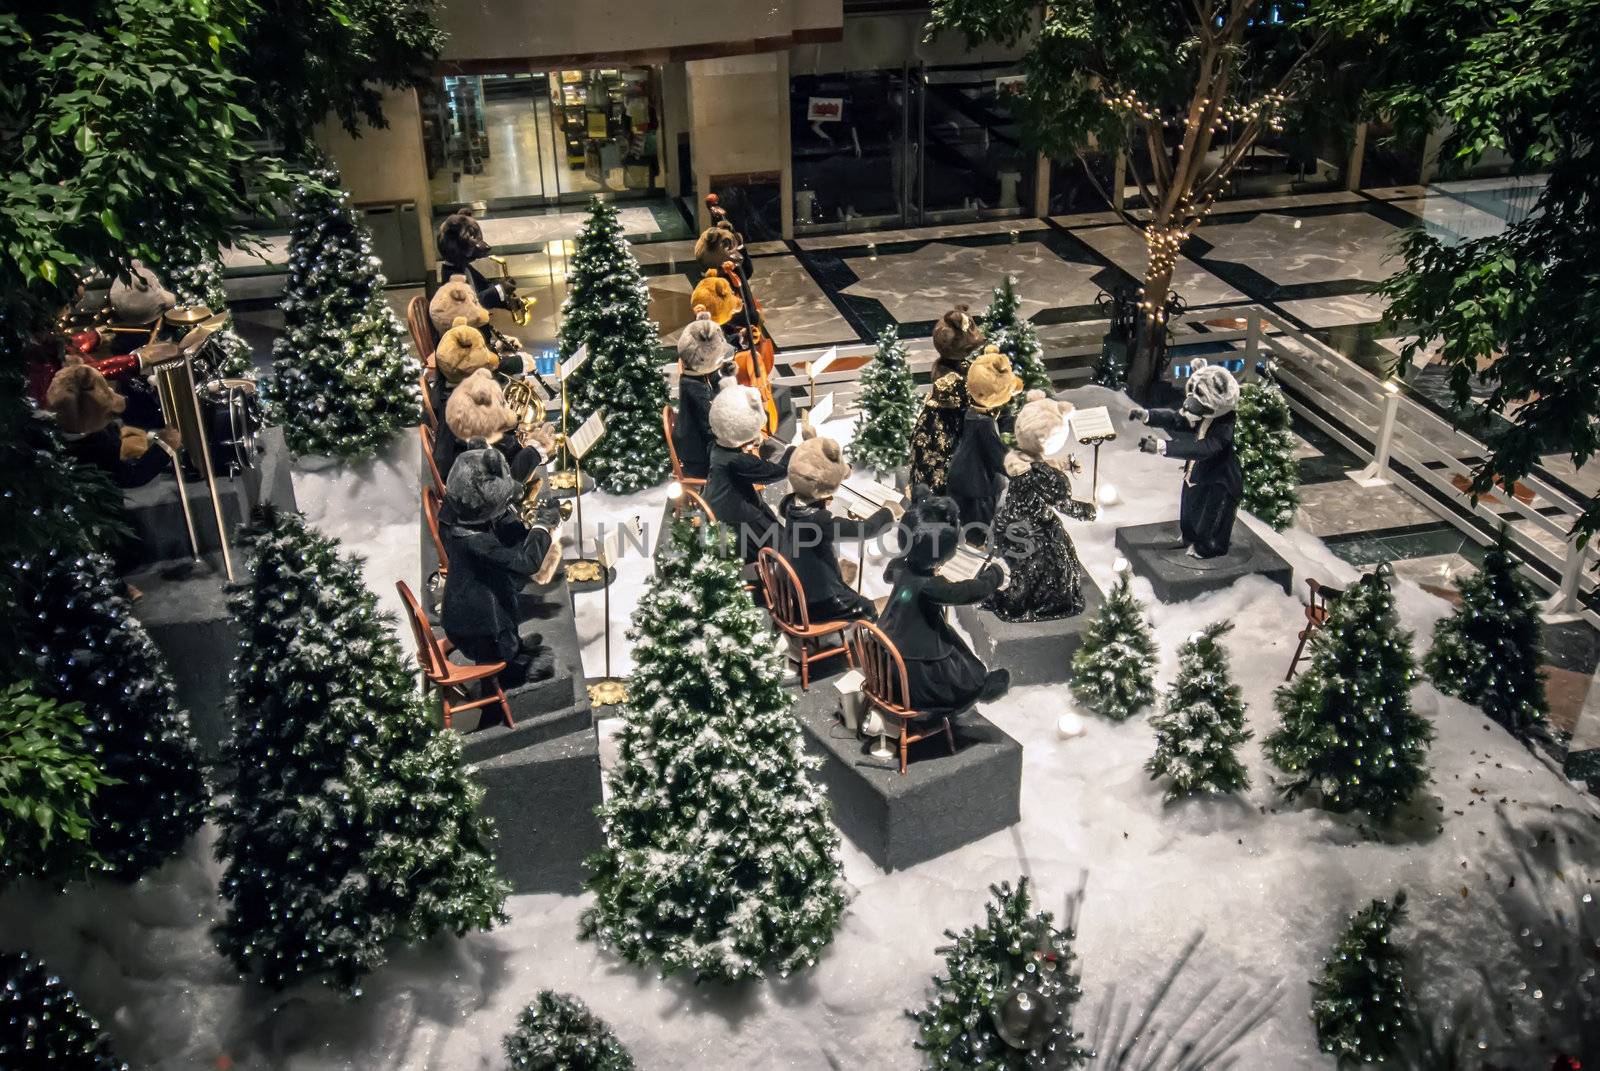 robotic bears playing at concert in the mall during christmas